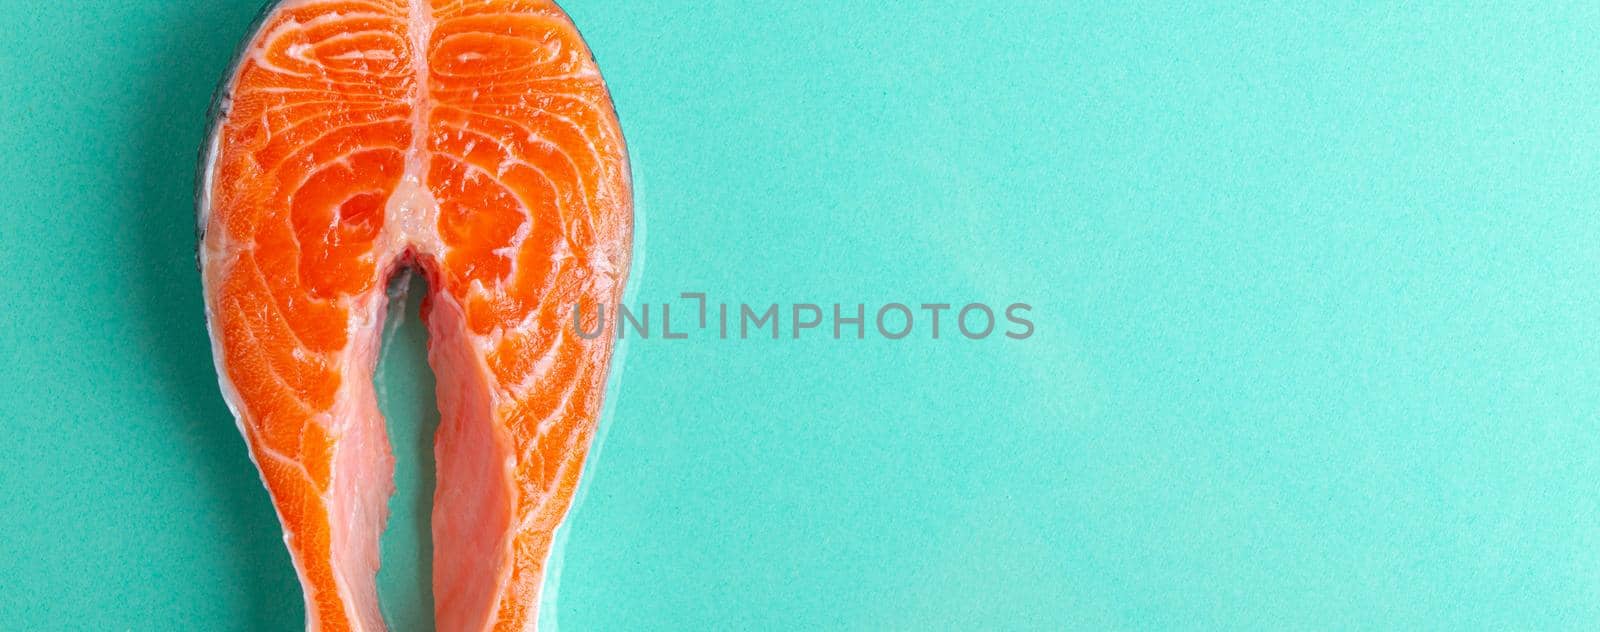 Uncooked raw fresh fish salmon steak top view on blue clean background from above, delicacy healthy fish eating and nutrition concept flat lay space for text